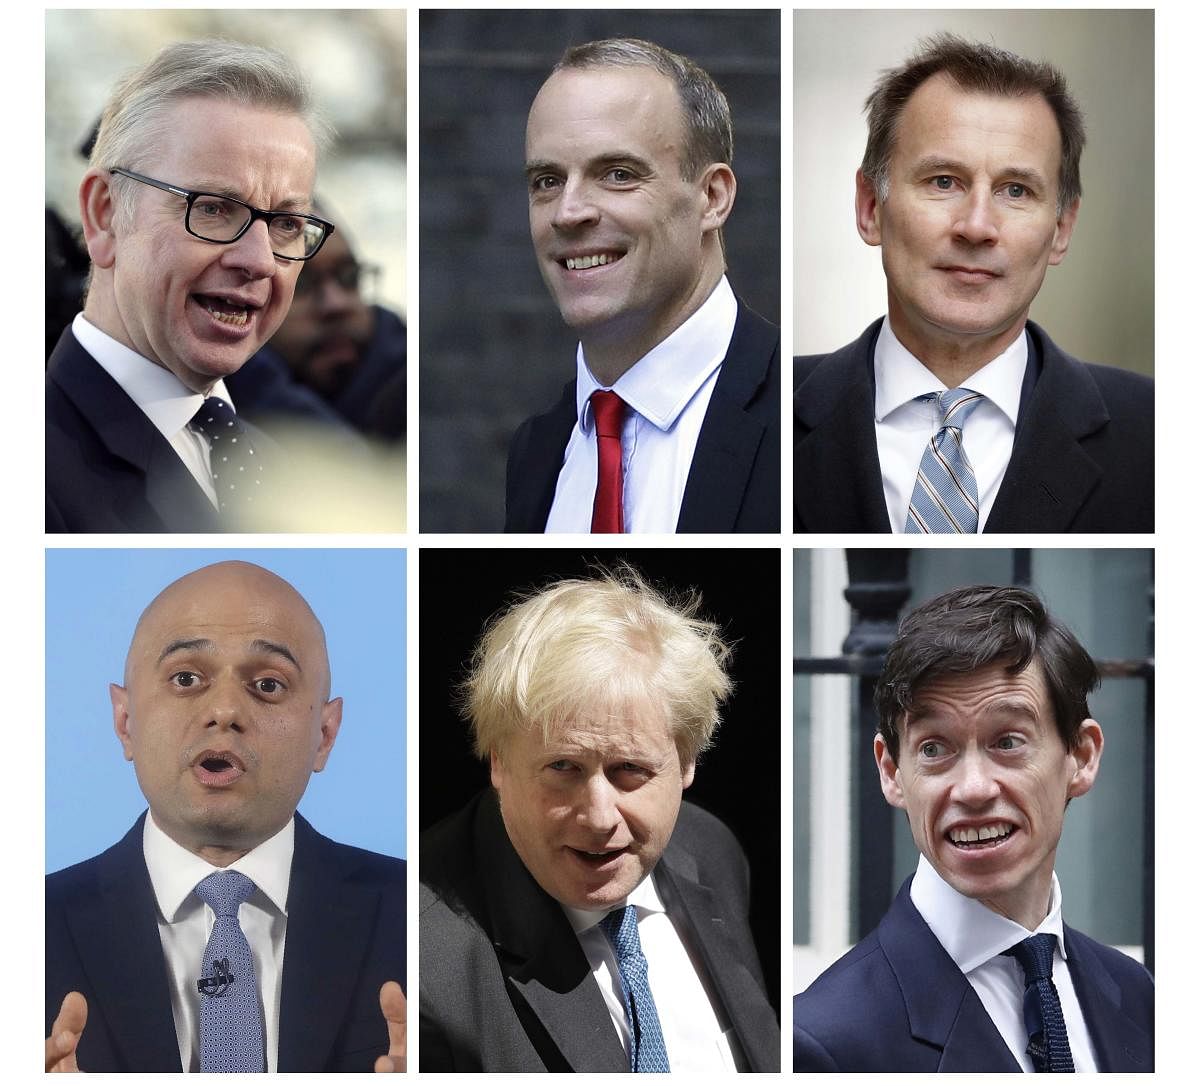 This combination photo made up of file photos, shows the remaining six contenders in the Conservative Party leadership race Friday June 14, 2019. Top from left: Michael Gove, Dominic Raab, Jeremy Hunt, and bottom from left: Sajid Javid, Boris Johnson, Rory Stewart. Conservative Party legislators will hold more elimination votes next week, with the final two contenders put to a vote of 160,000 Conservative Party members nationwide and the winner will become Conservative leader and prime minister. AP/PTI